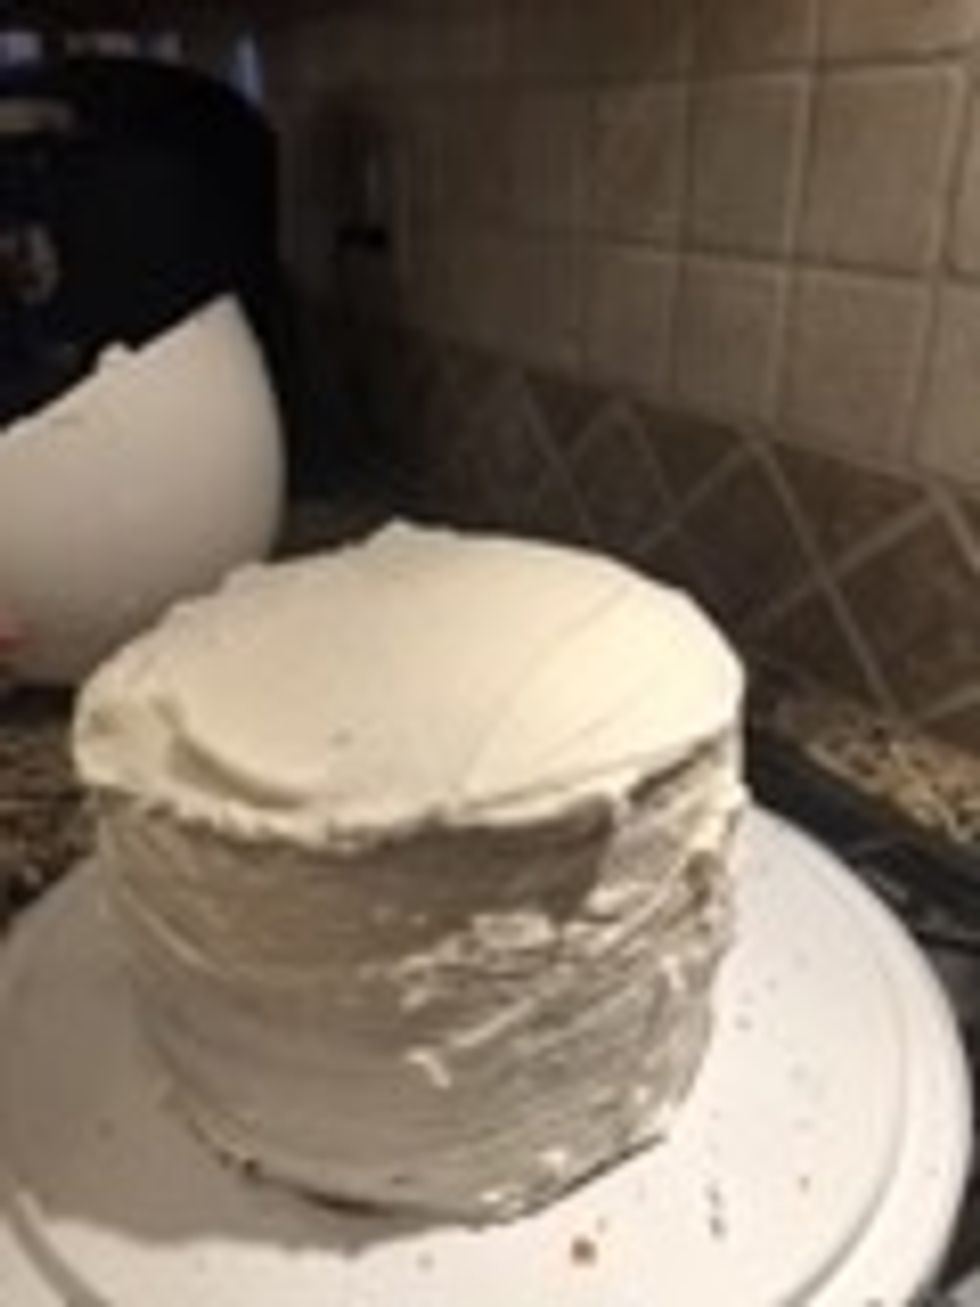 Put icing on top of the red layer until fully covered.